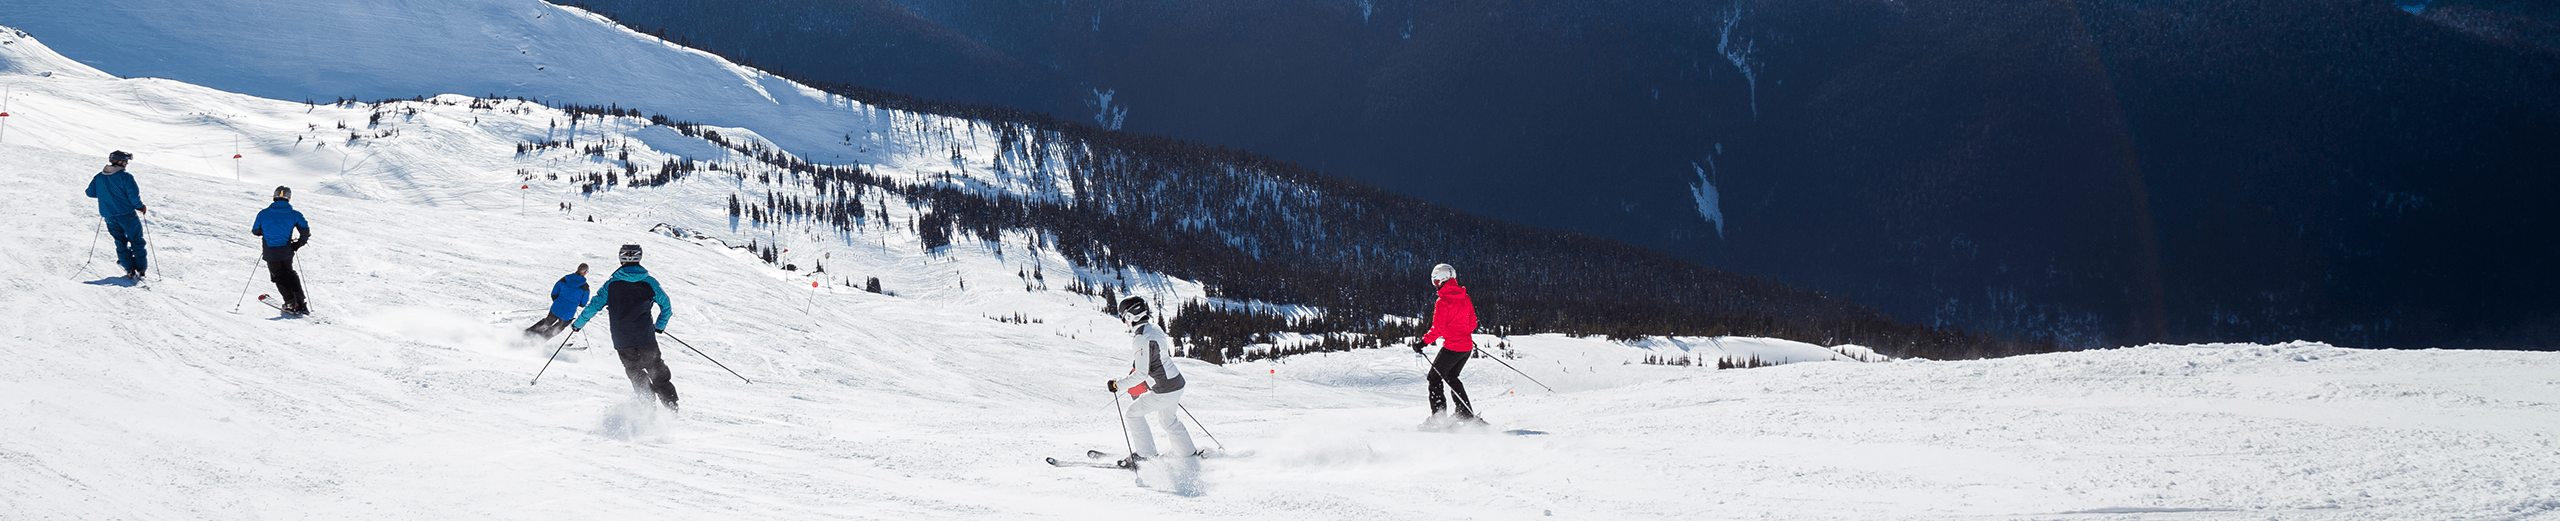 Case Study: A group skiers on a mountain.